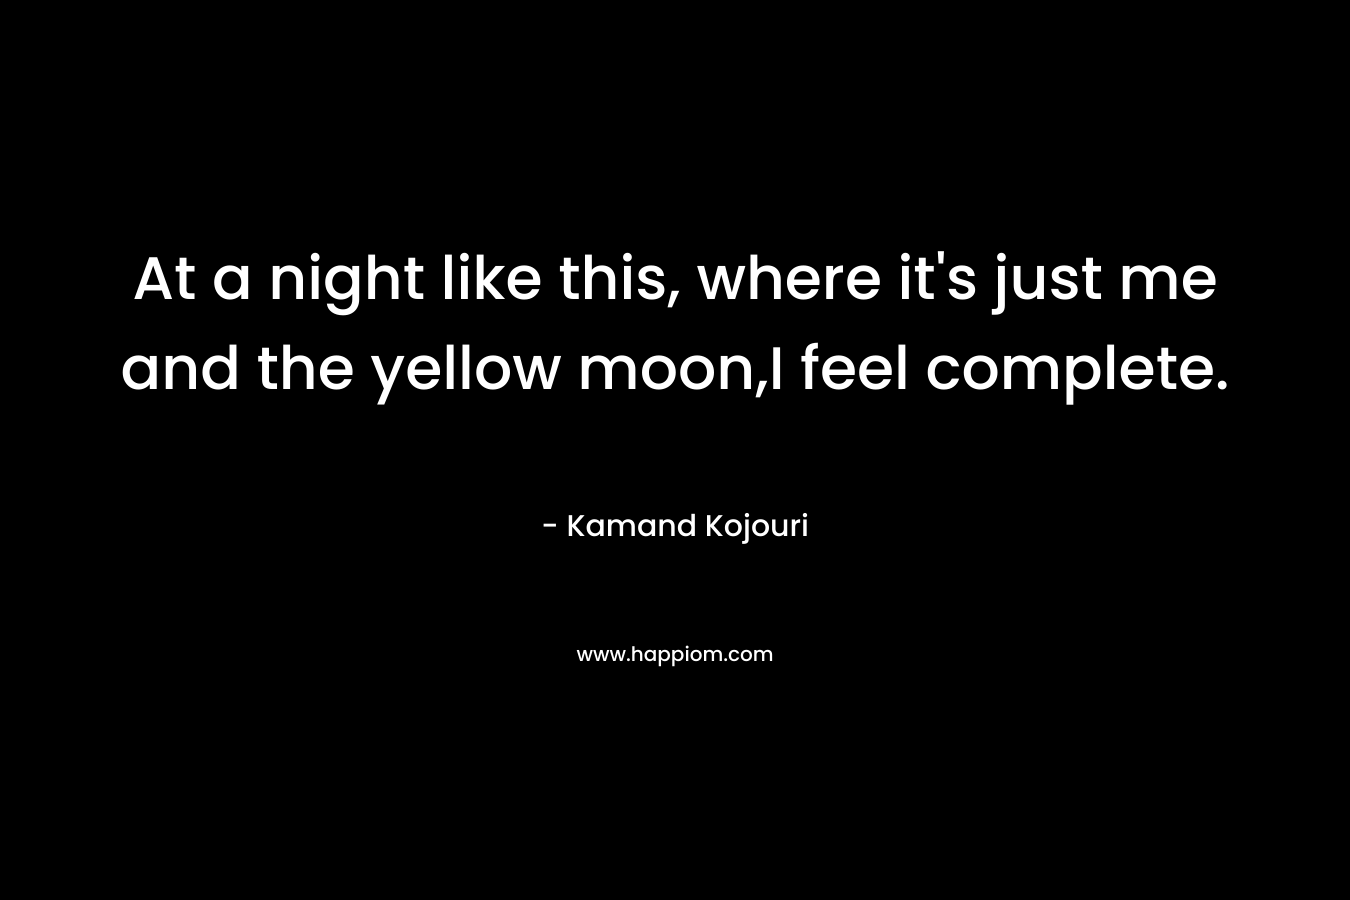 At a night like this, where it's just me and the yellow moon,I feel complete.